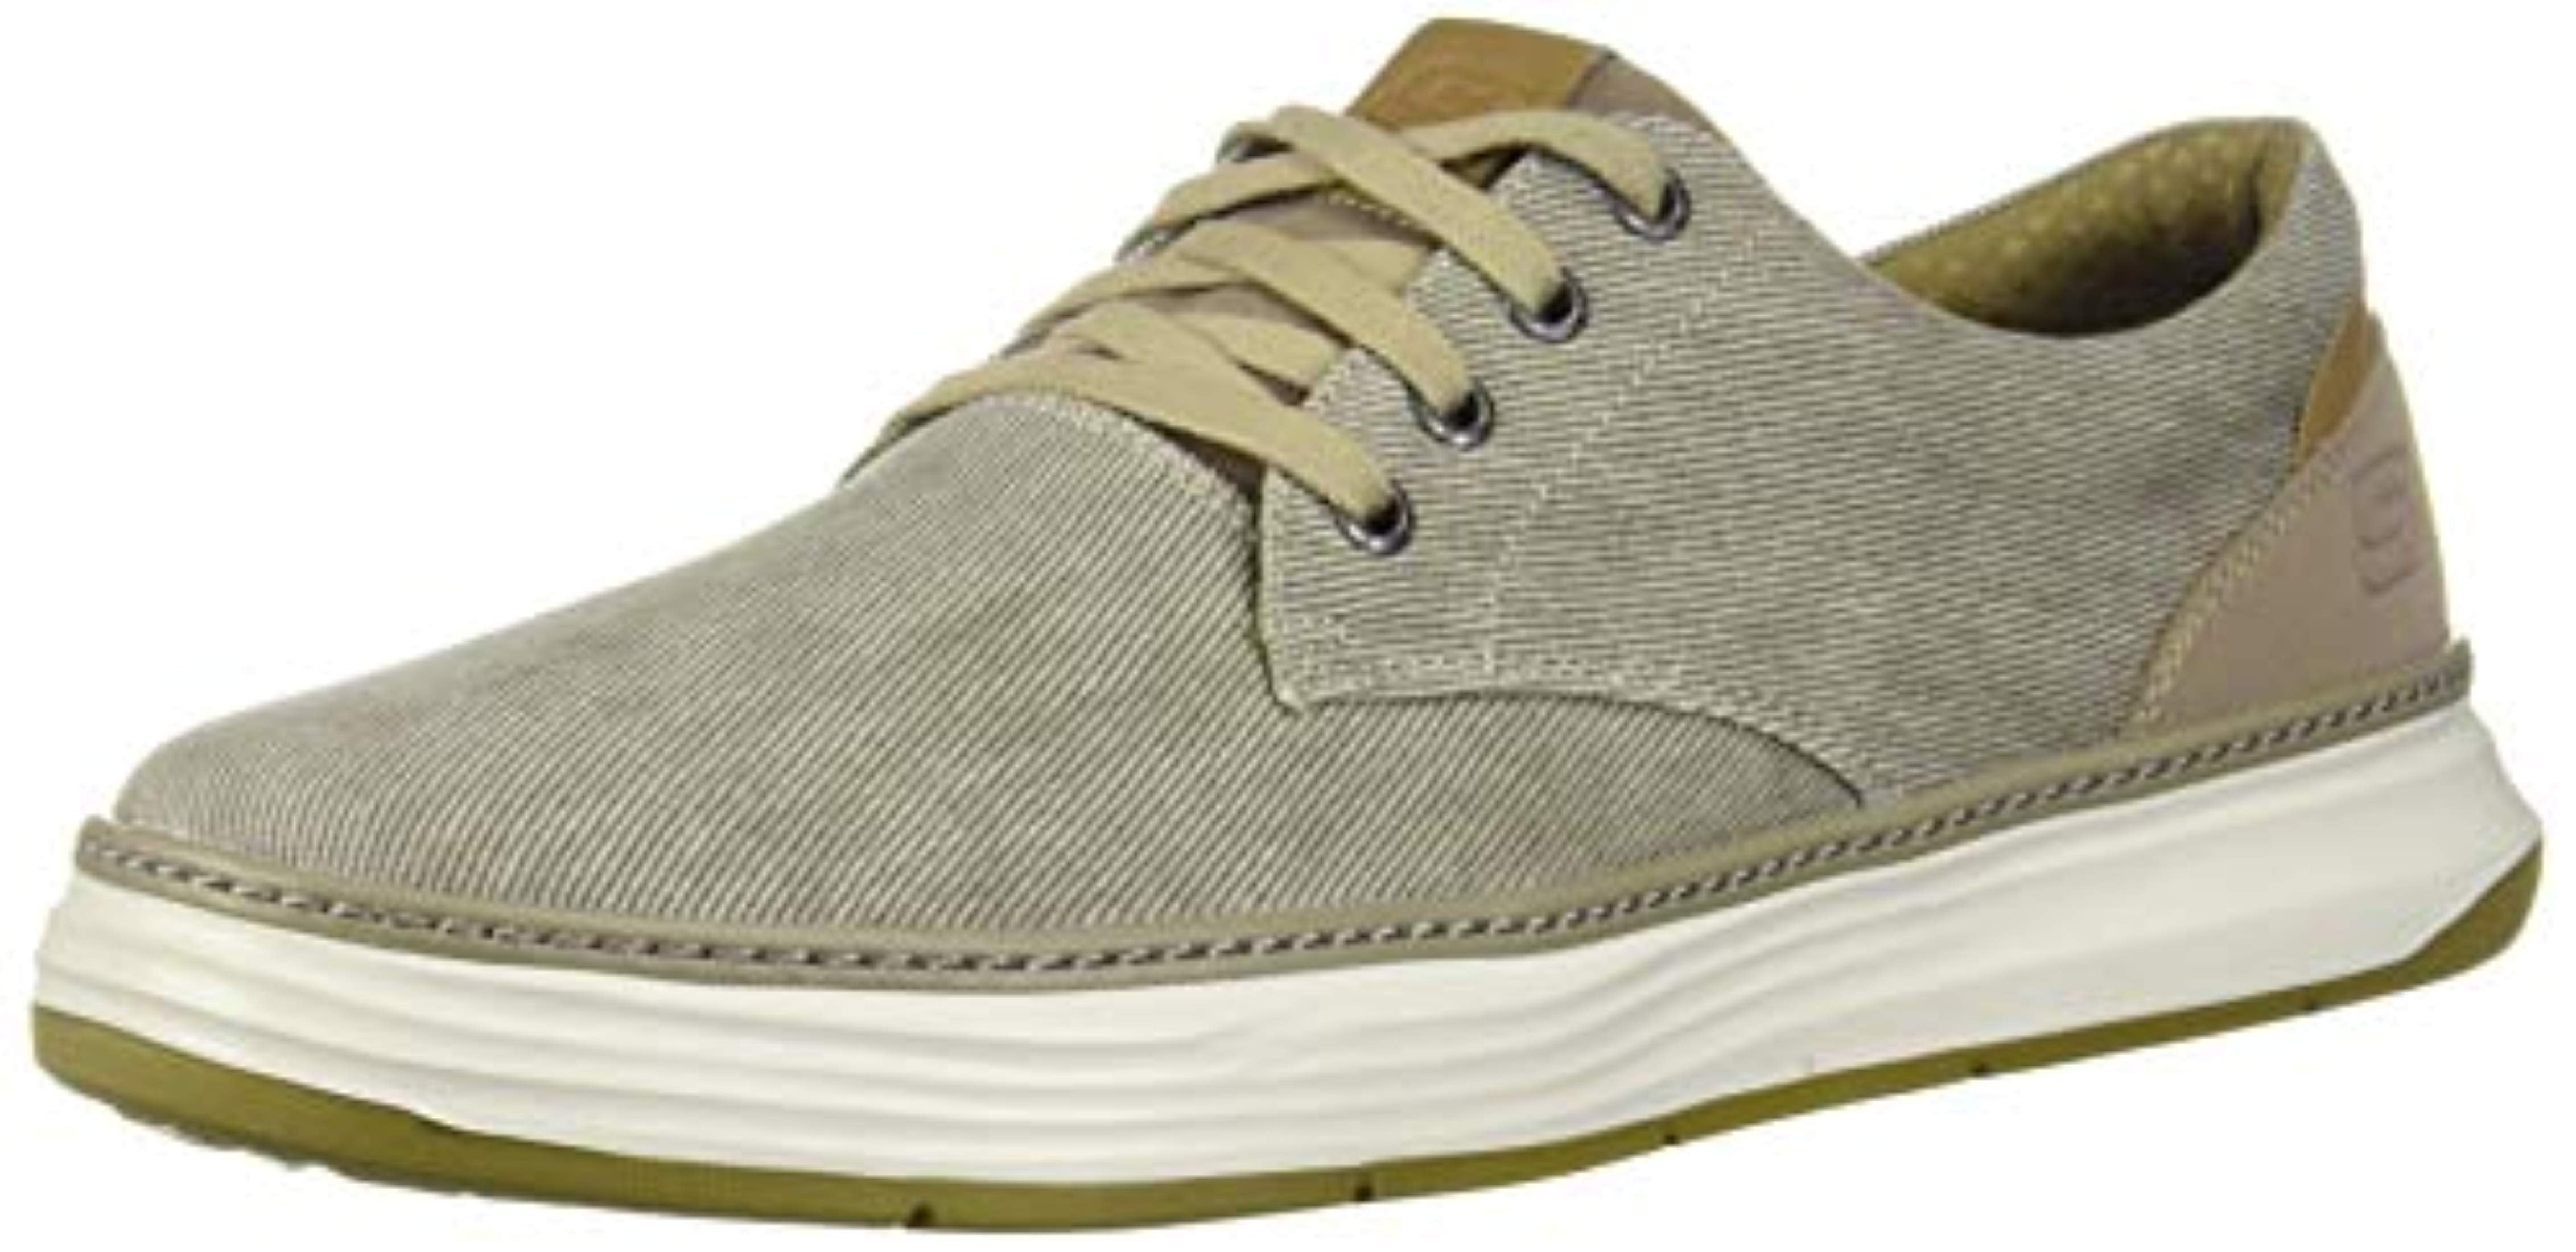 skechers canvas shoes india